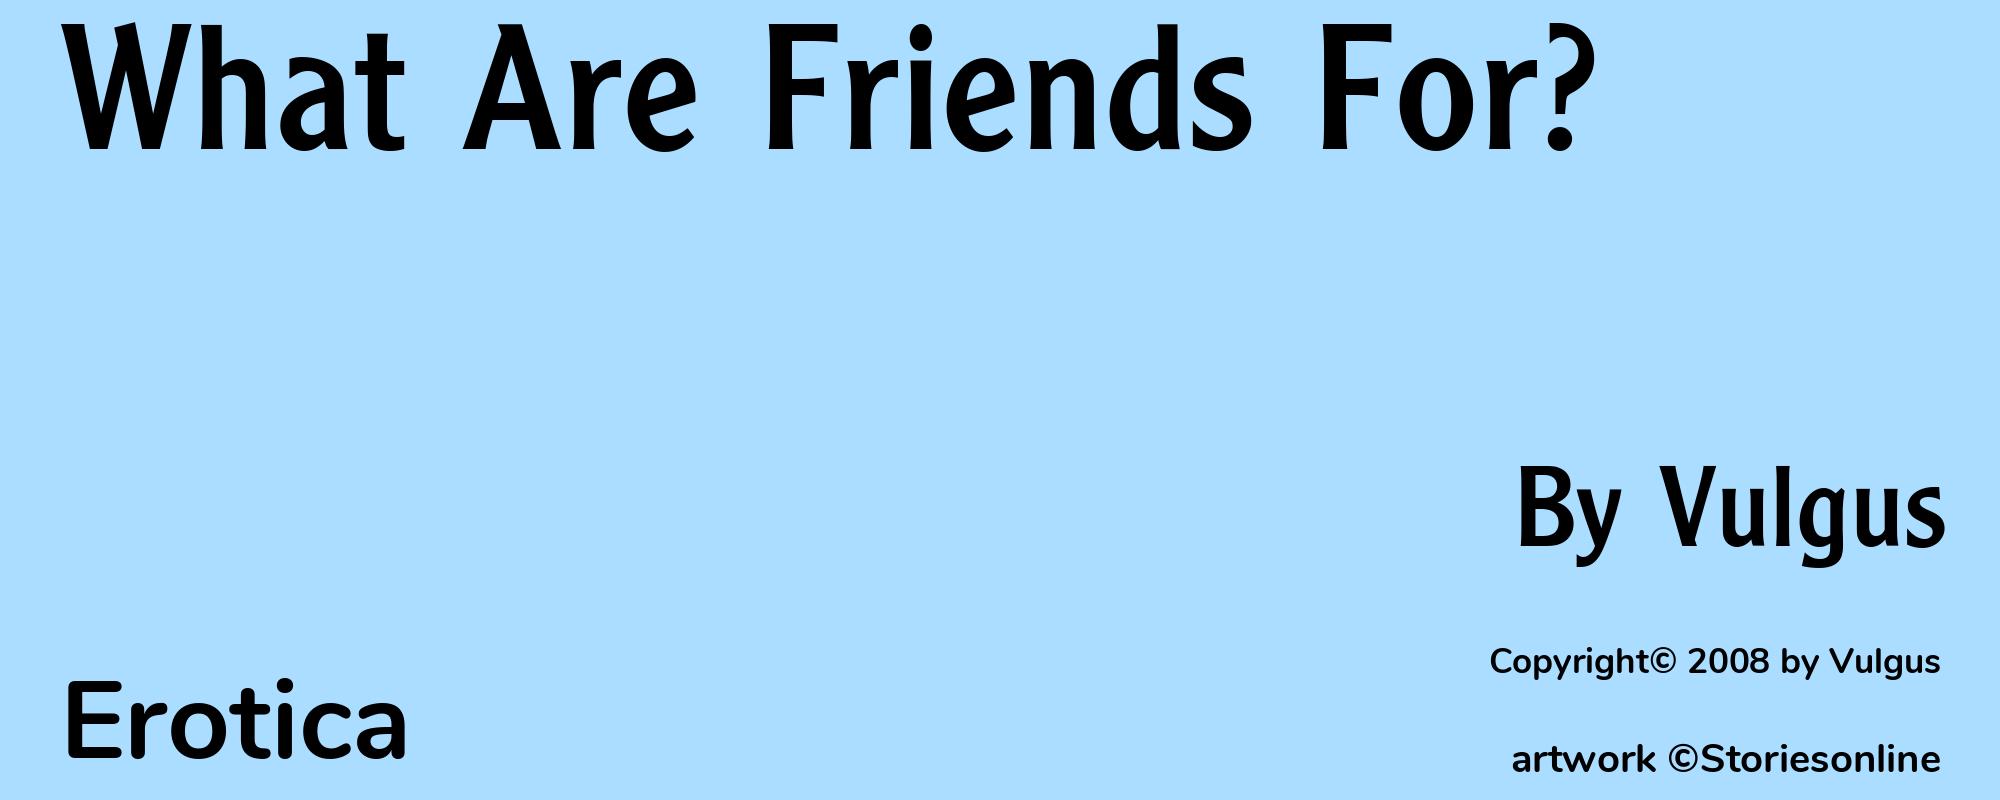 What Are Friends For? - Cover